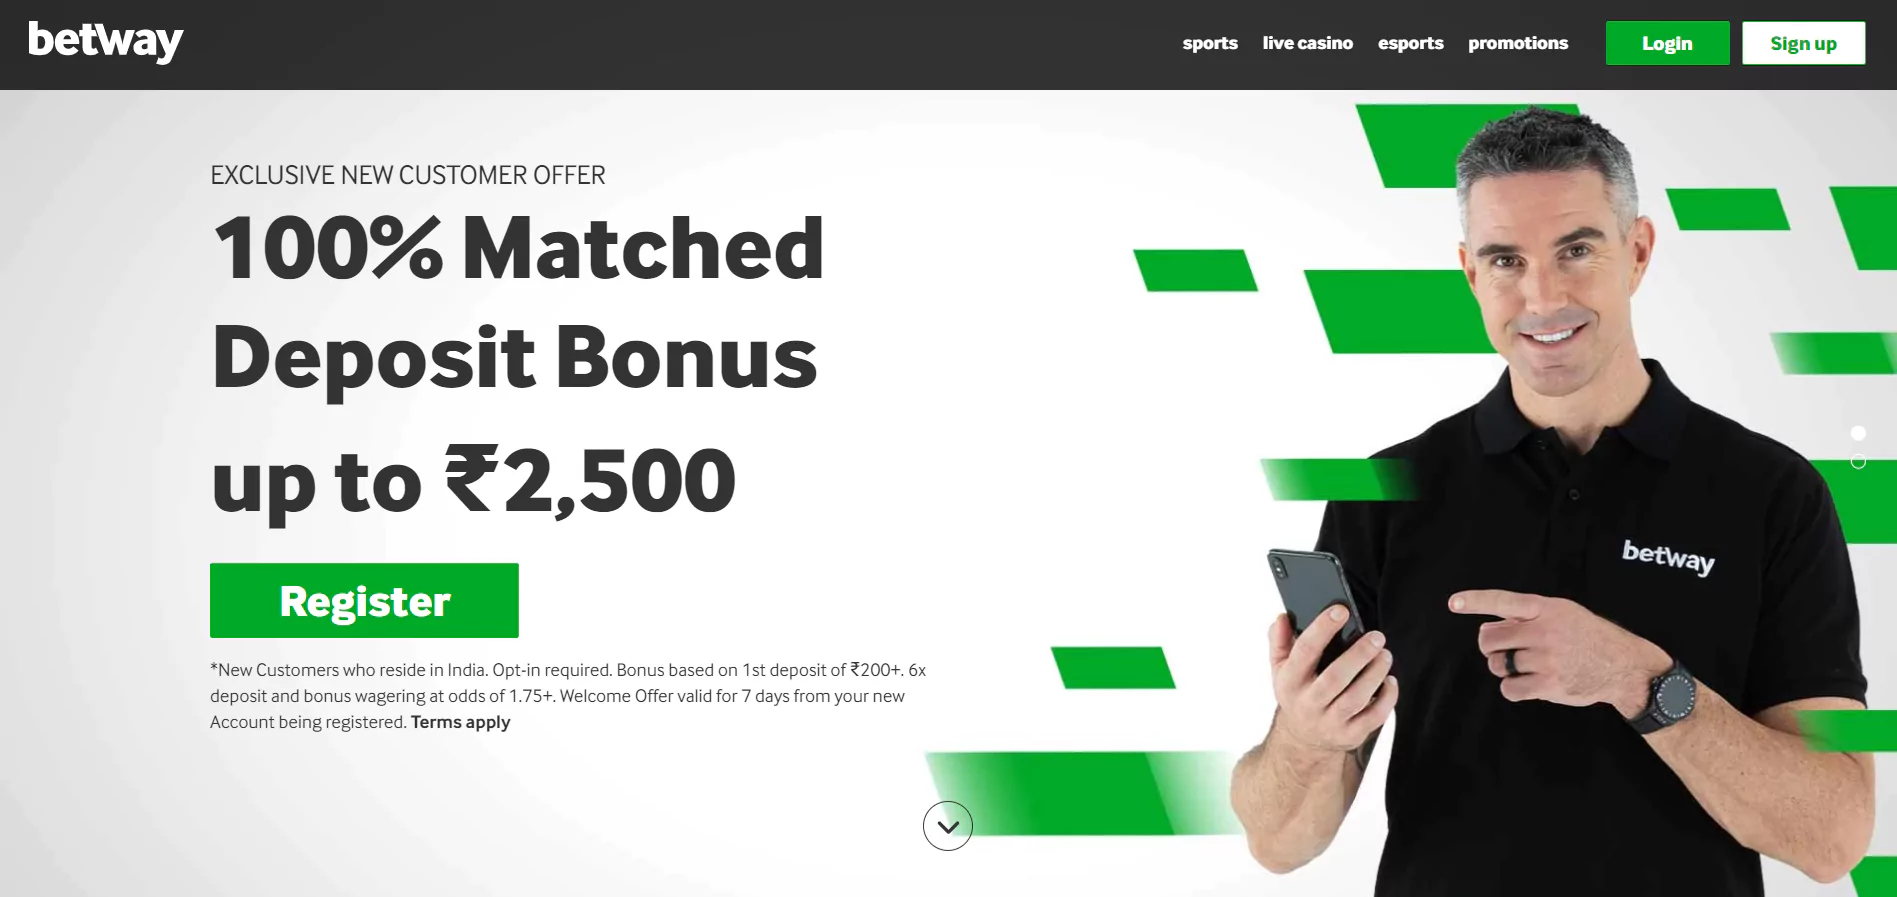 The main page of the website of the betway bookmaker